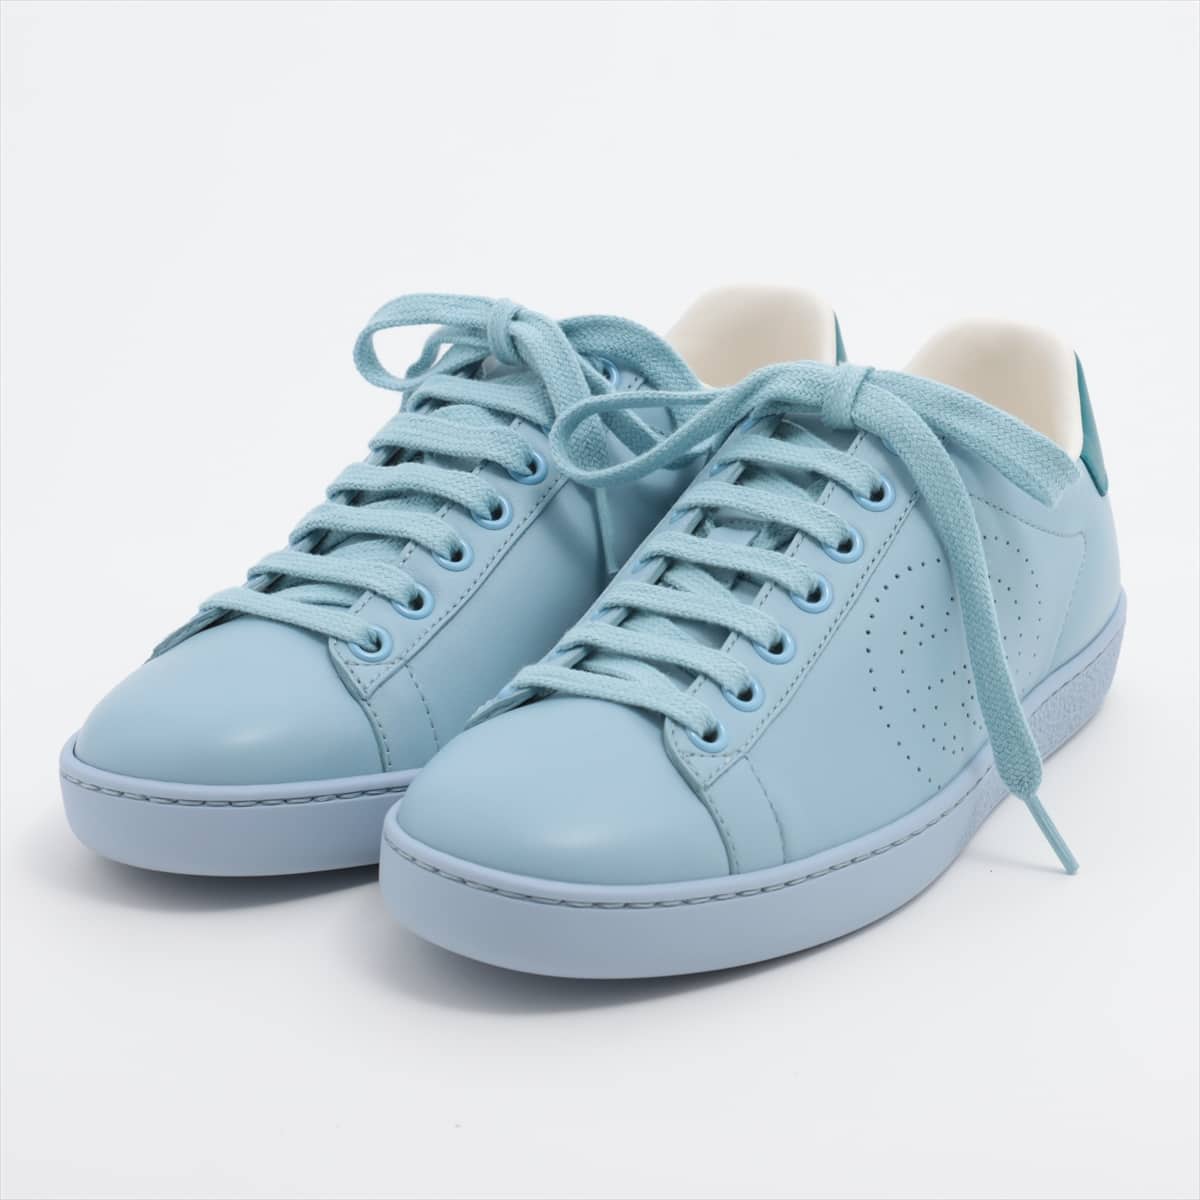 Gucci Interlocking G Leather Sneakers 35 Ladies' Blue 598527 There is a box